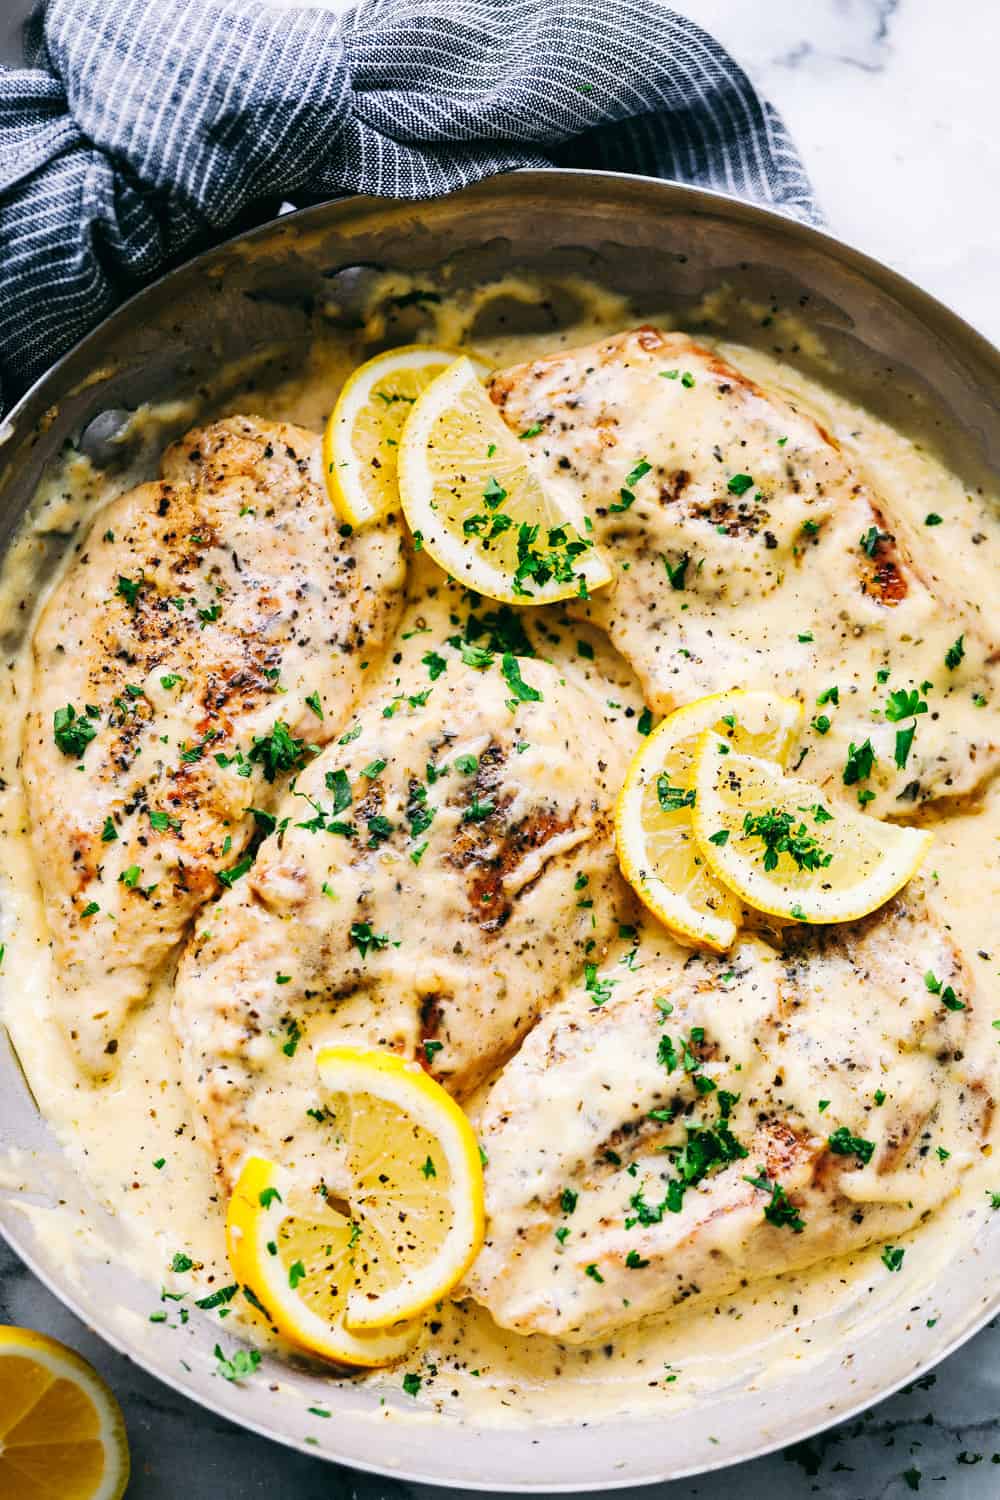 Creamy Lemon Parmesan Chicken The Recipe Critic,Painting And Decorating Overalls